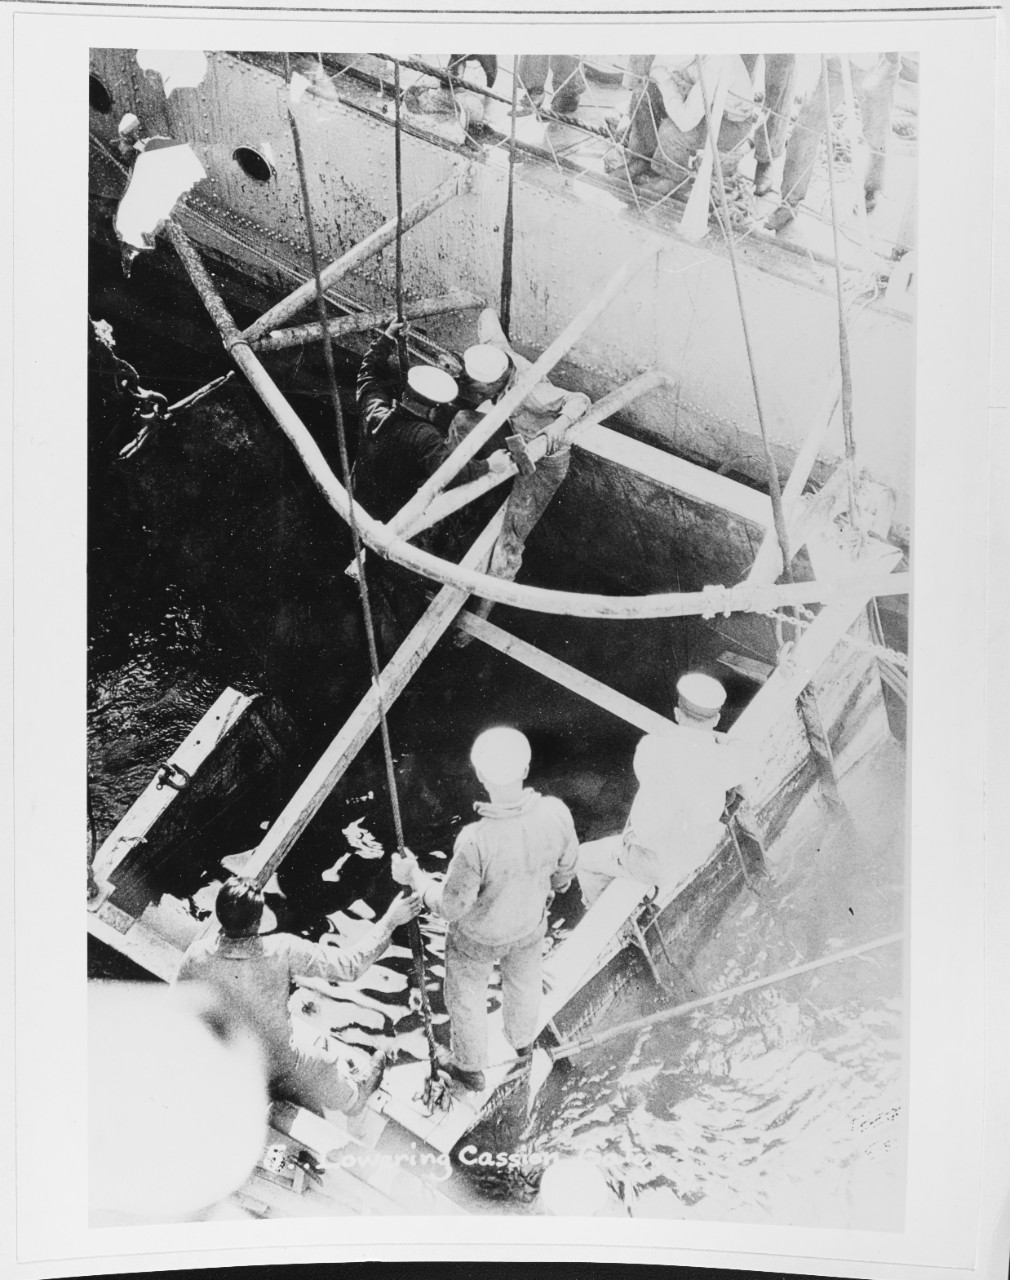 A caisson gate being lowered into position